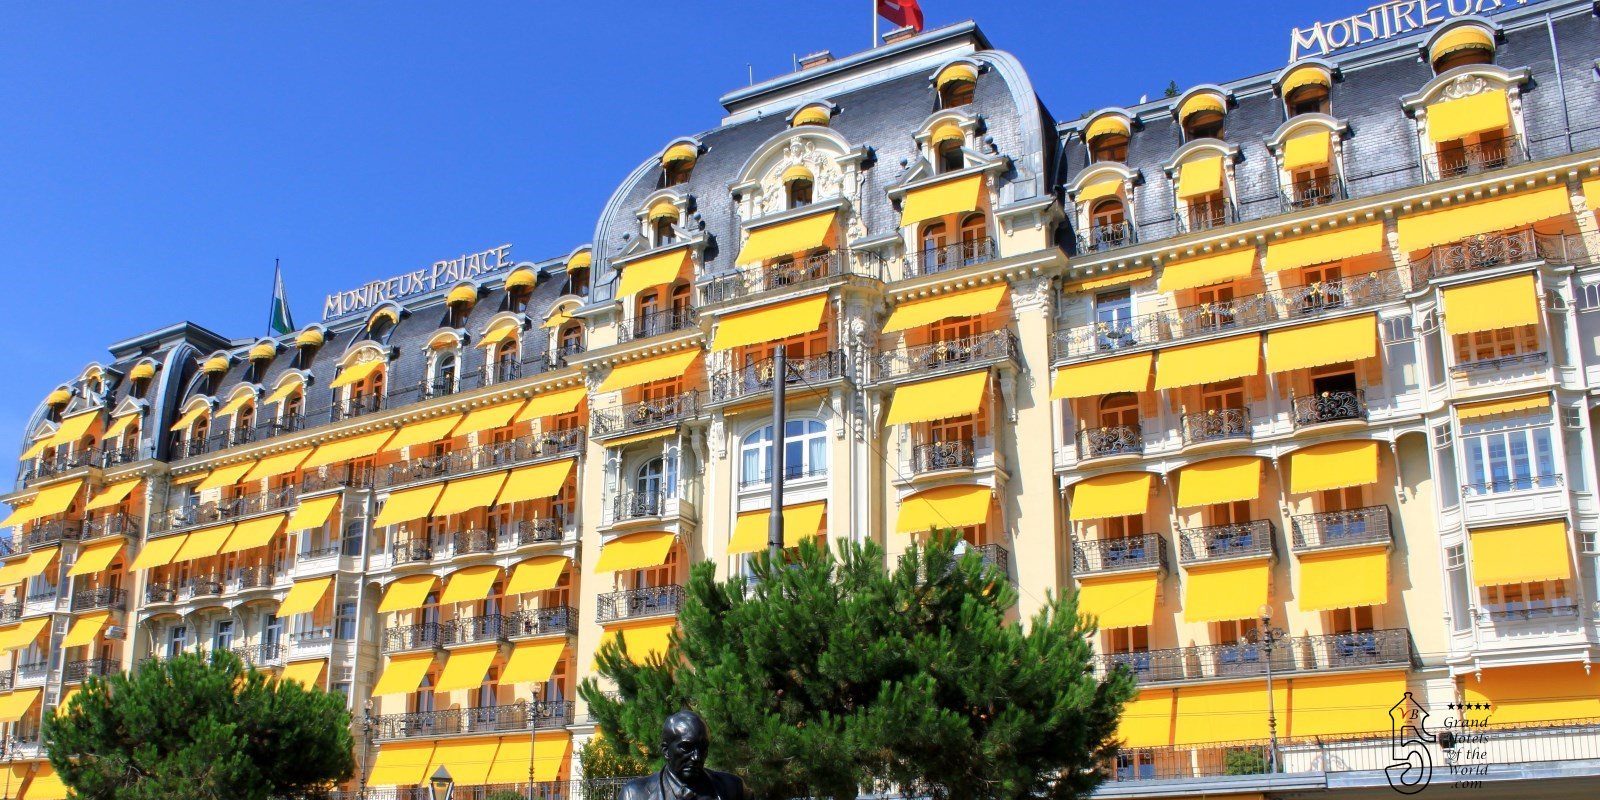 Montreux Palace in Montreux